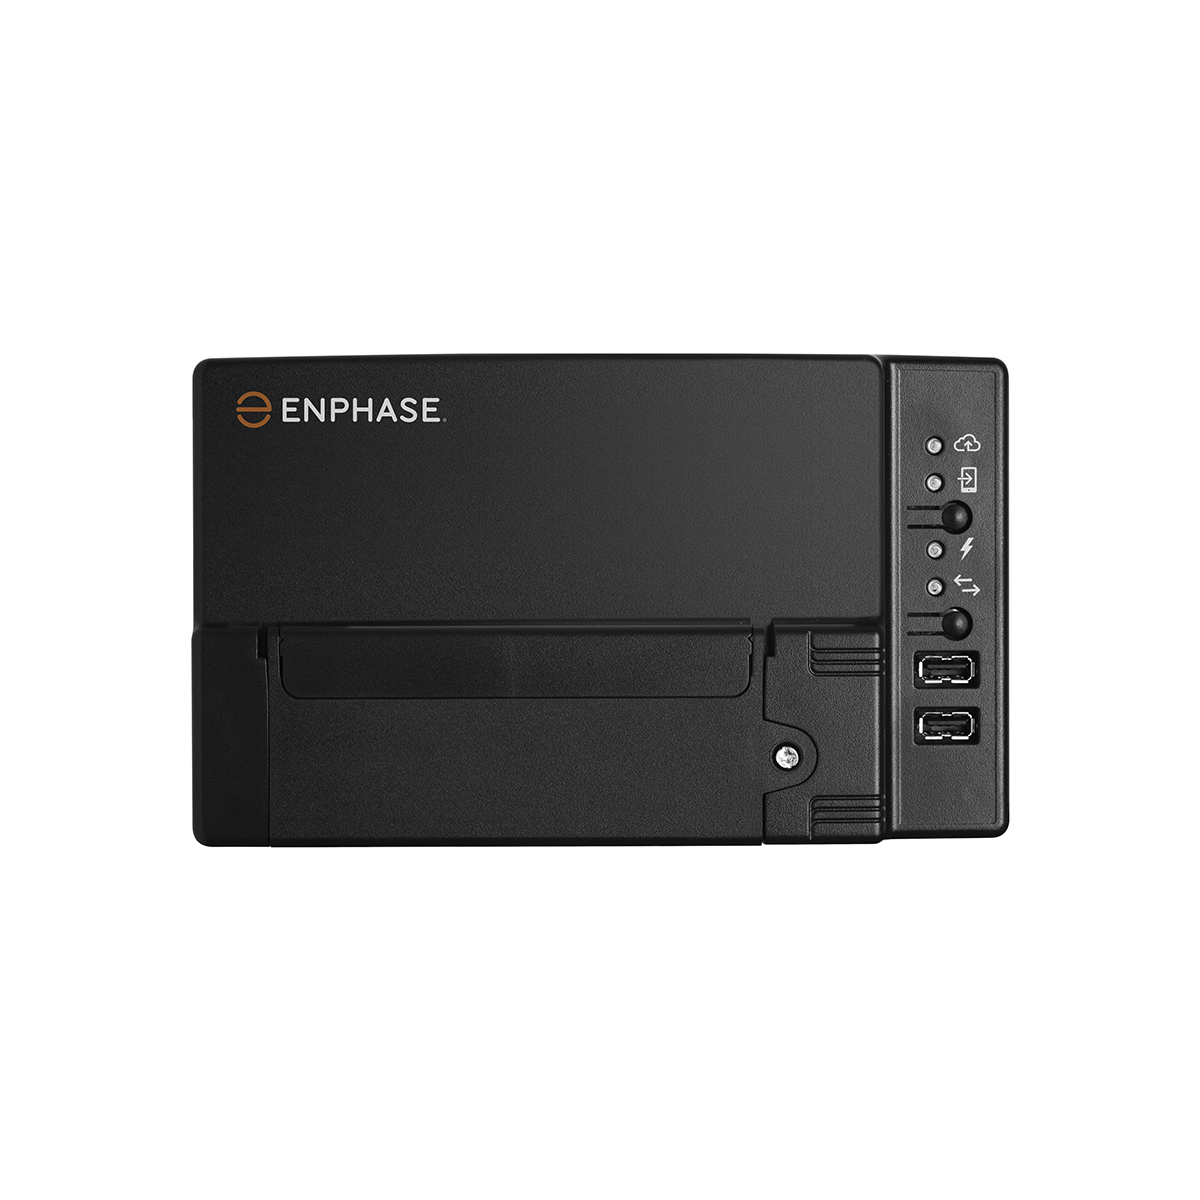 18x Sunpower P6 7290 wp met Enphase IQ8A en Accu 1x N Charge 10T,1 x N Charge 3T